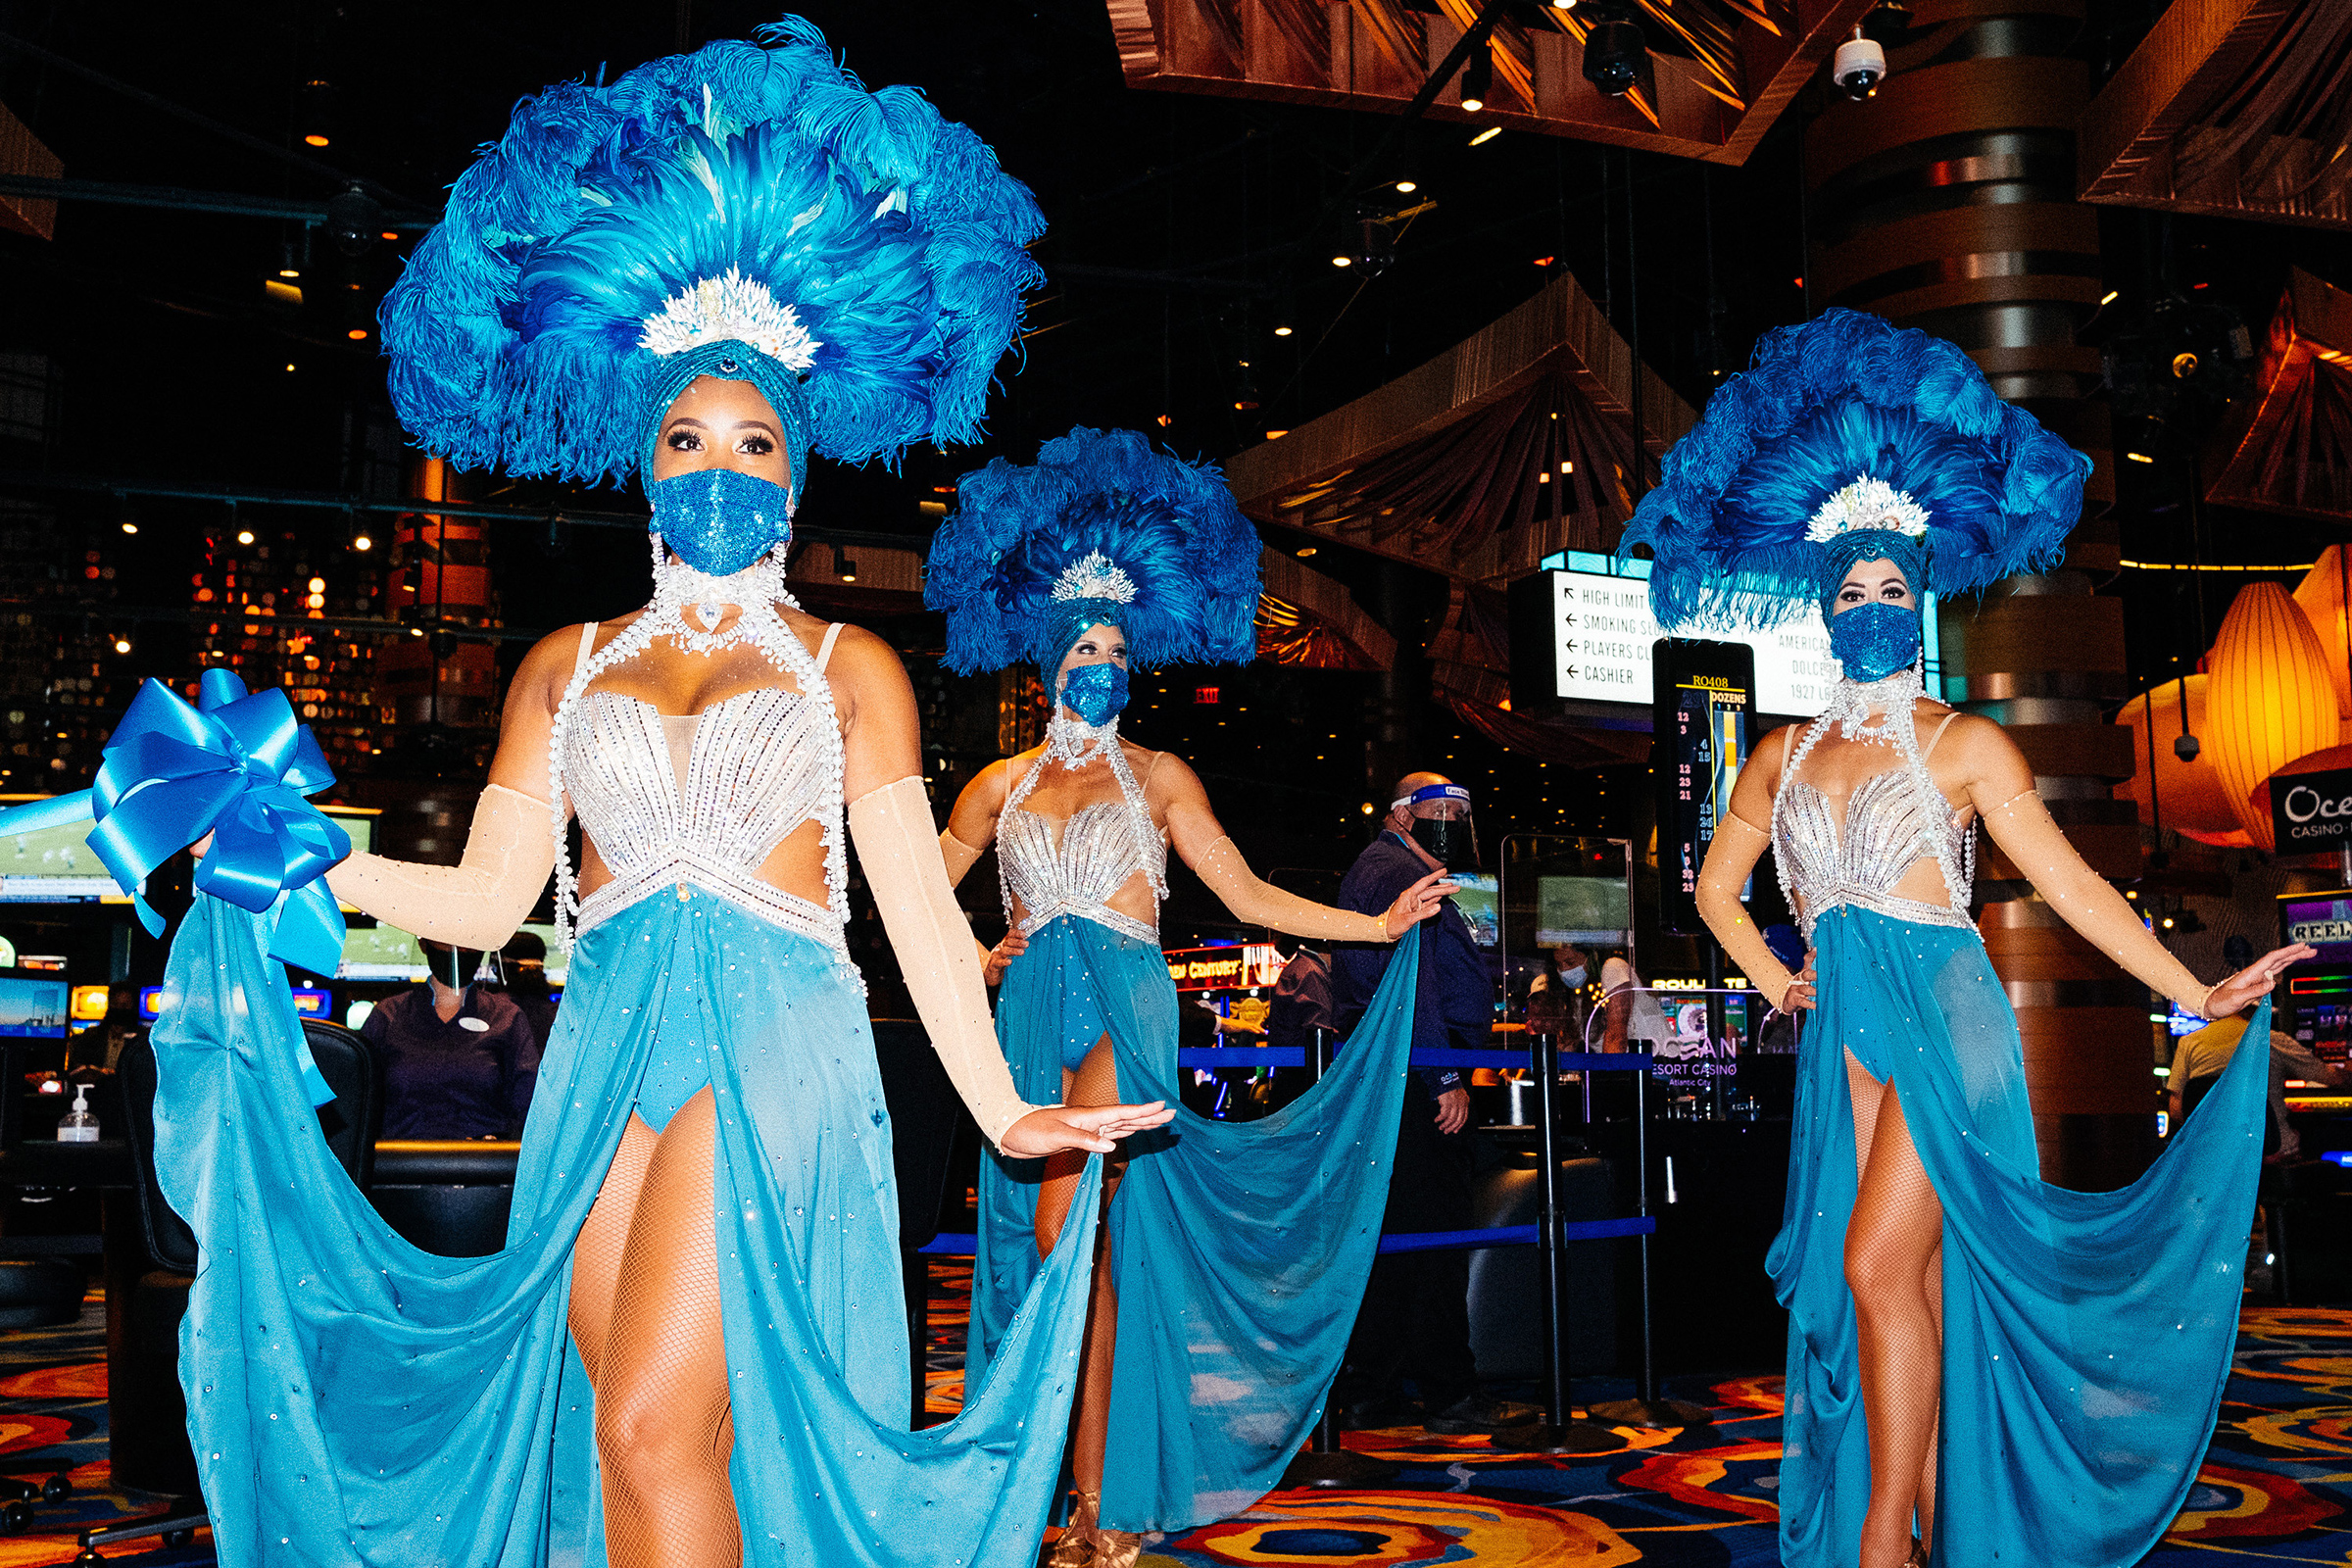 Showgirls wearing protective masks are seen inside Atlantic City's Ocean Casino Resort on July 2. (Michelle Gustafson—The New York Times/Redux)